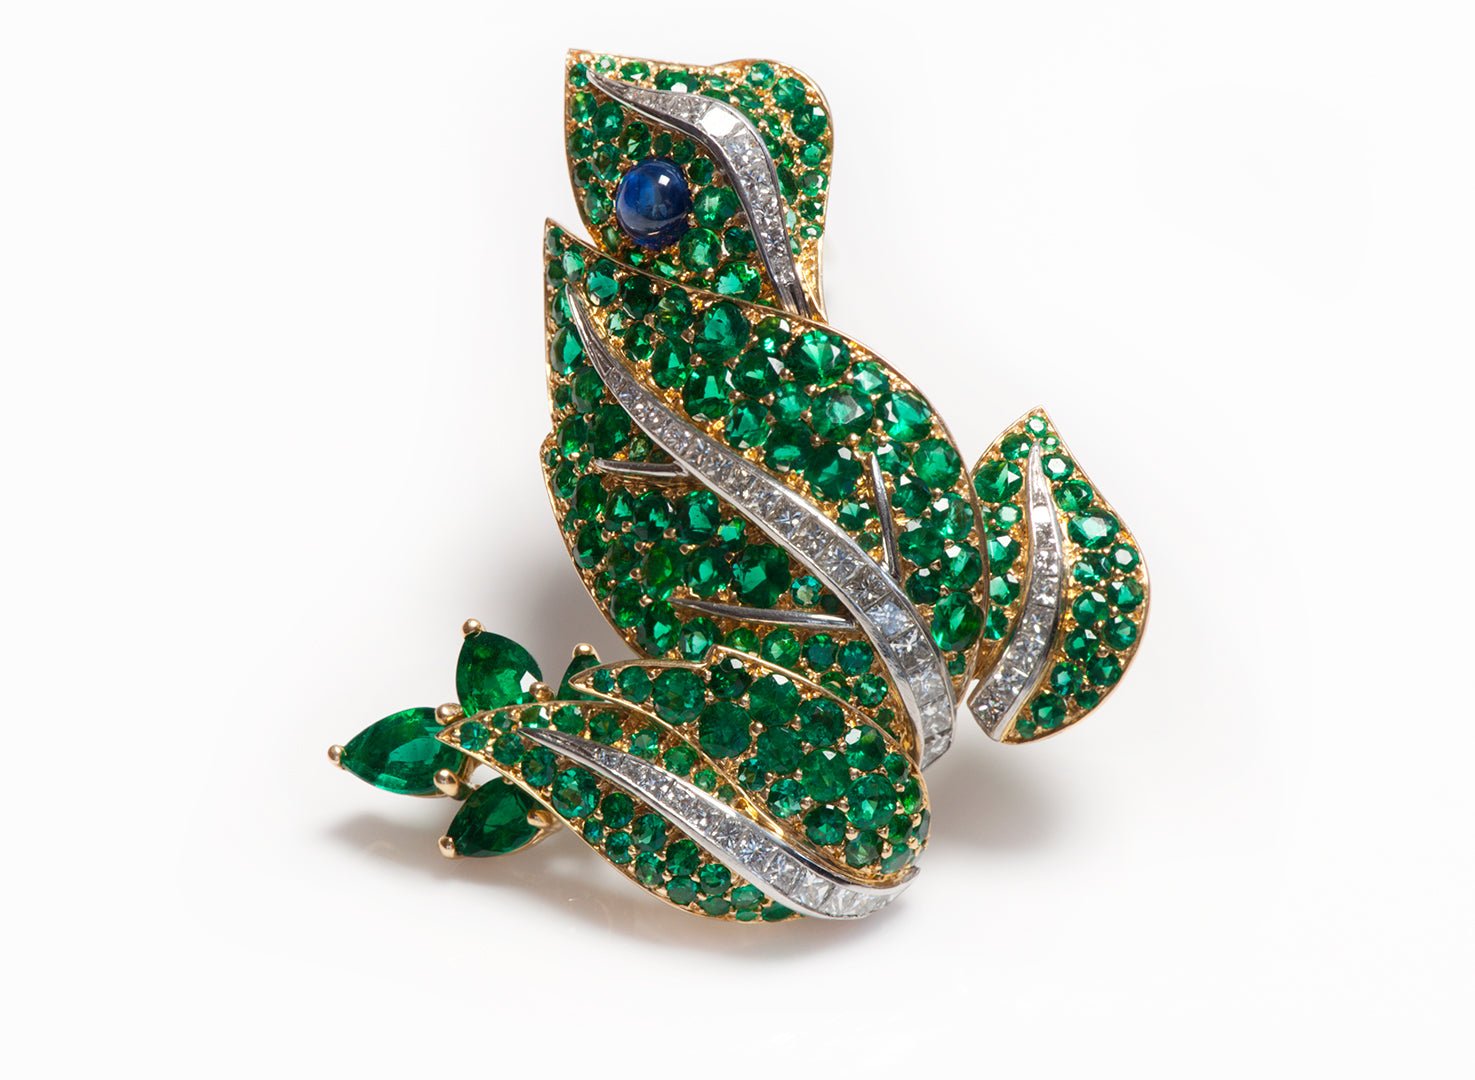 Fred Paris Gold Emerald Diamond Sapphire Frog Brooch - DSF Antique Jewelry